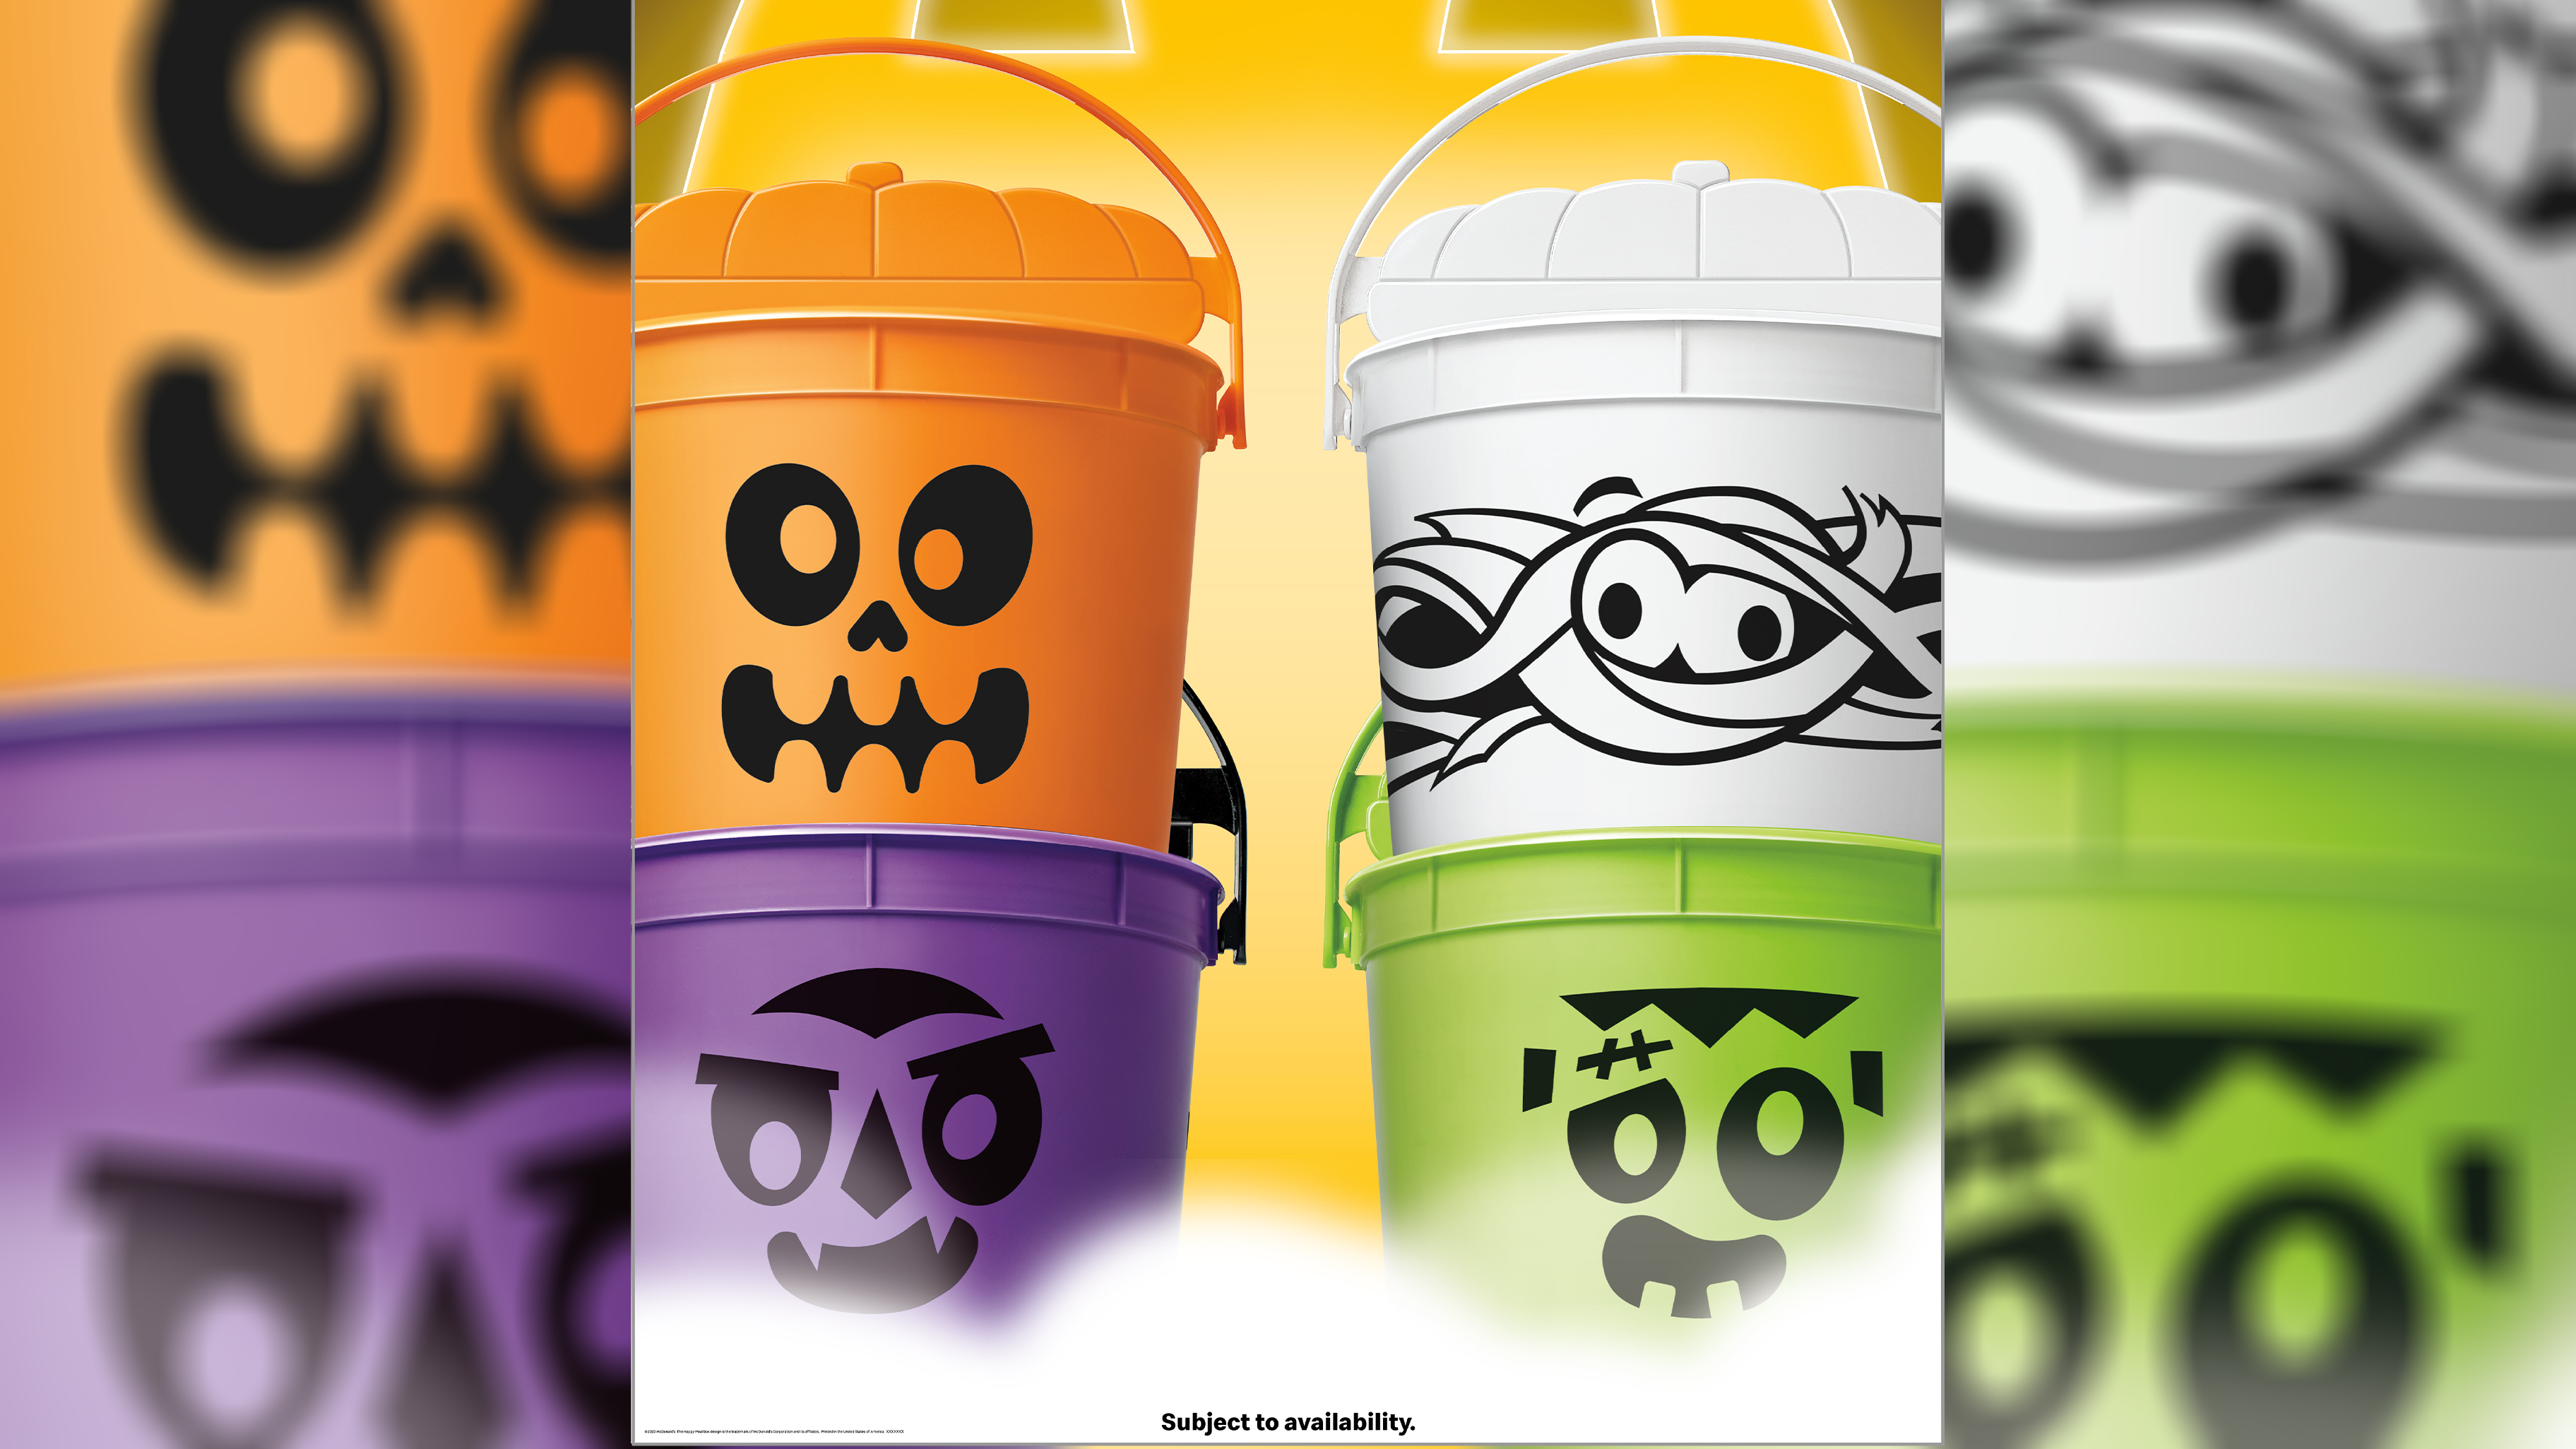 McDonald's Is Bringing Back Their Boo Buckets in 4 Colors